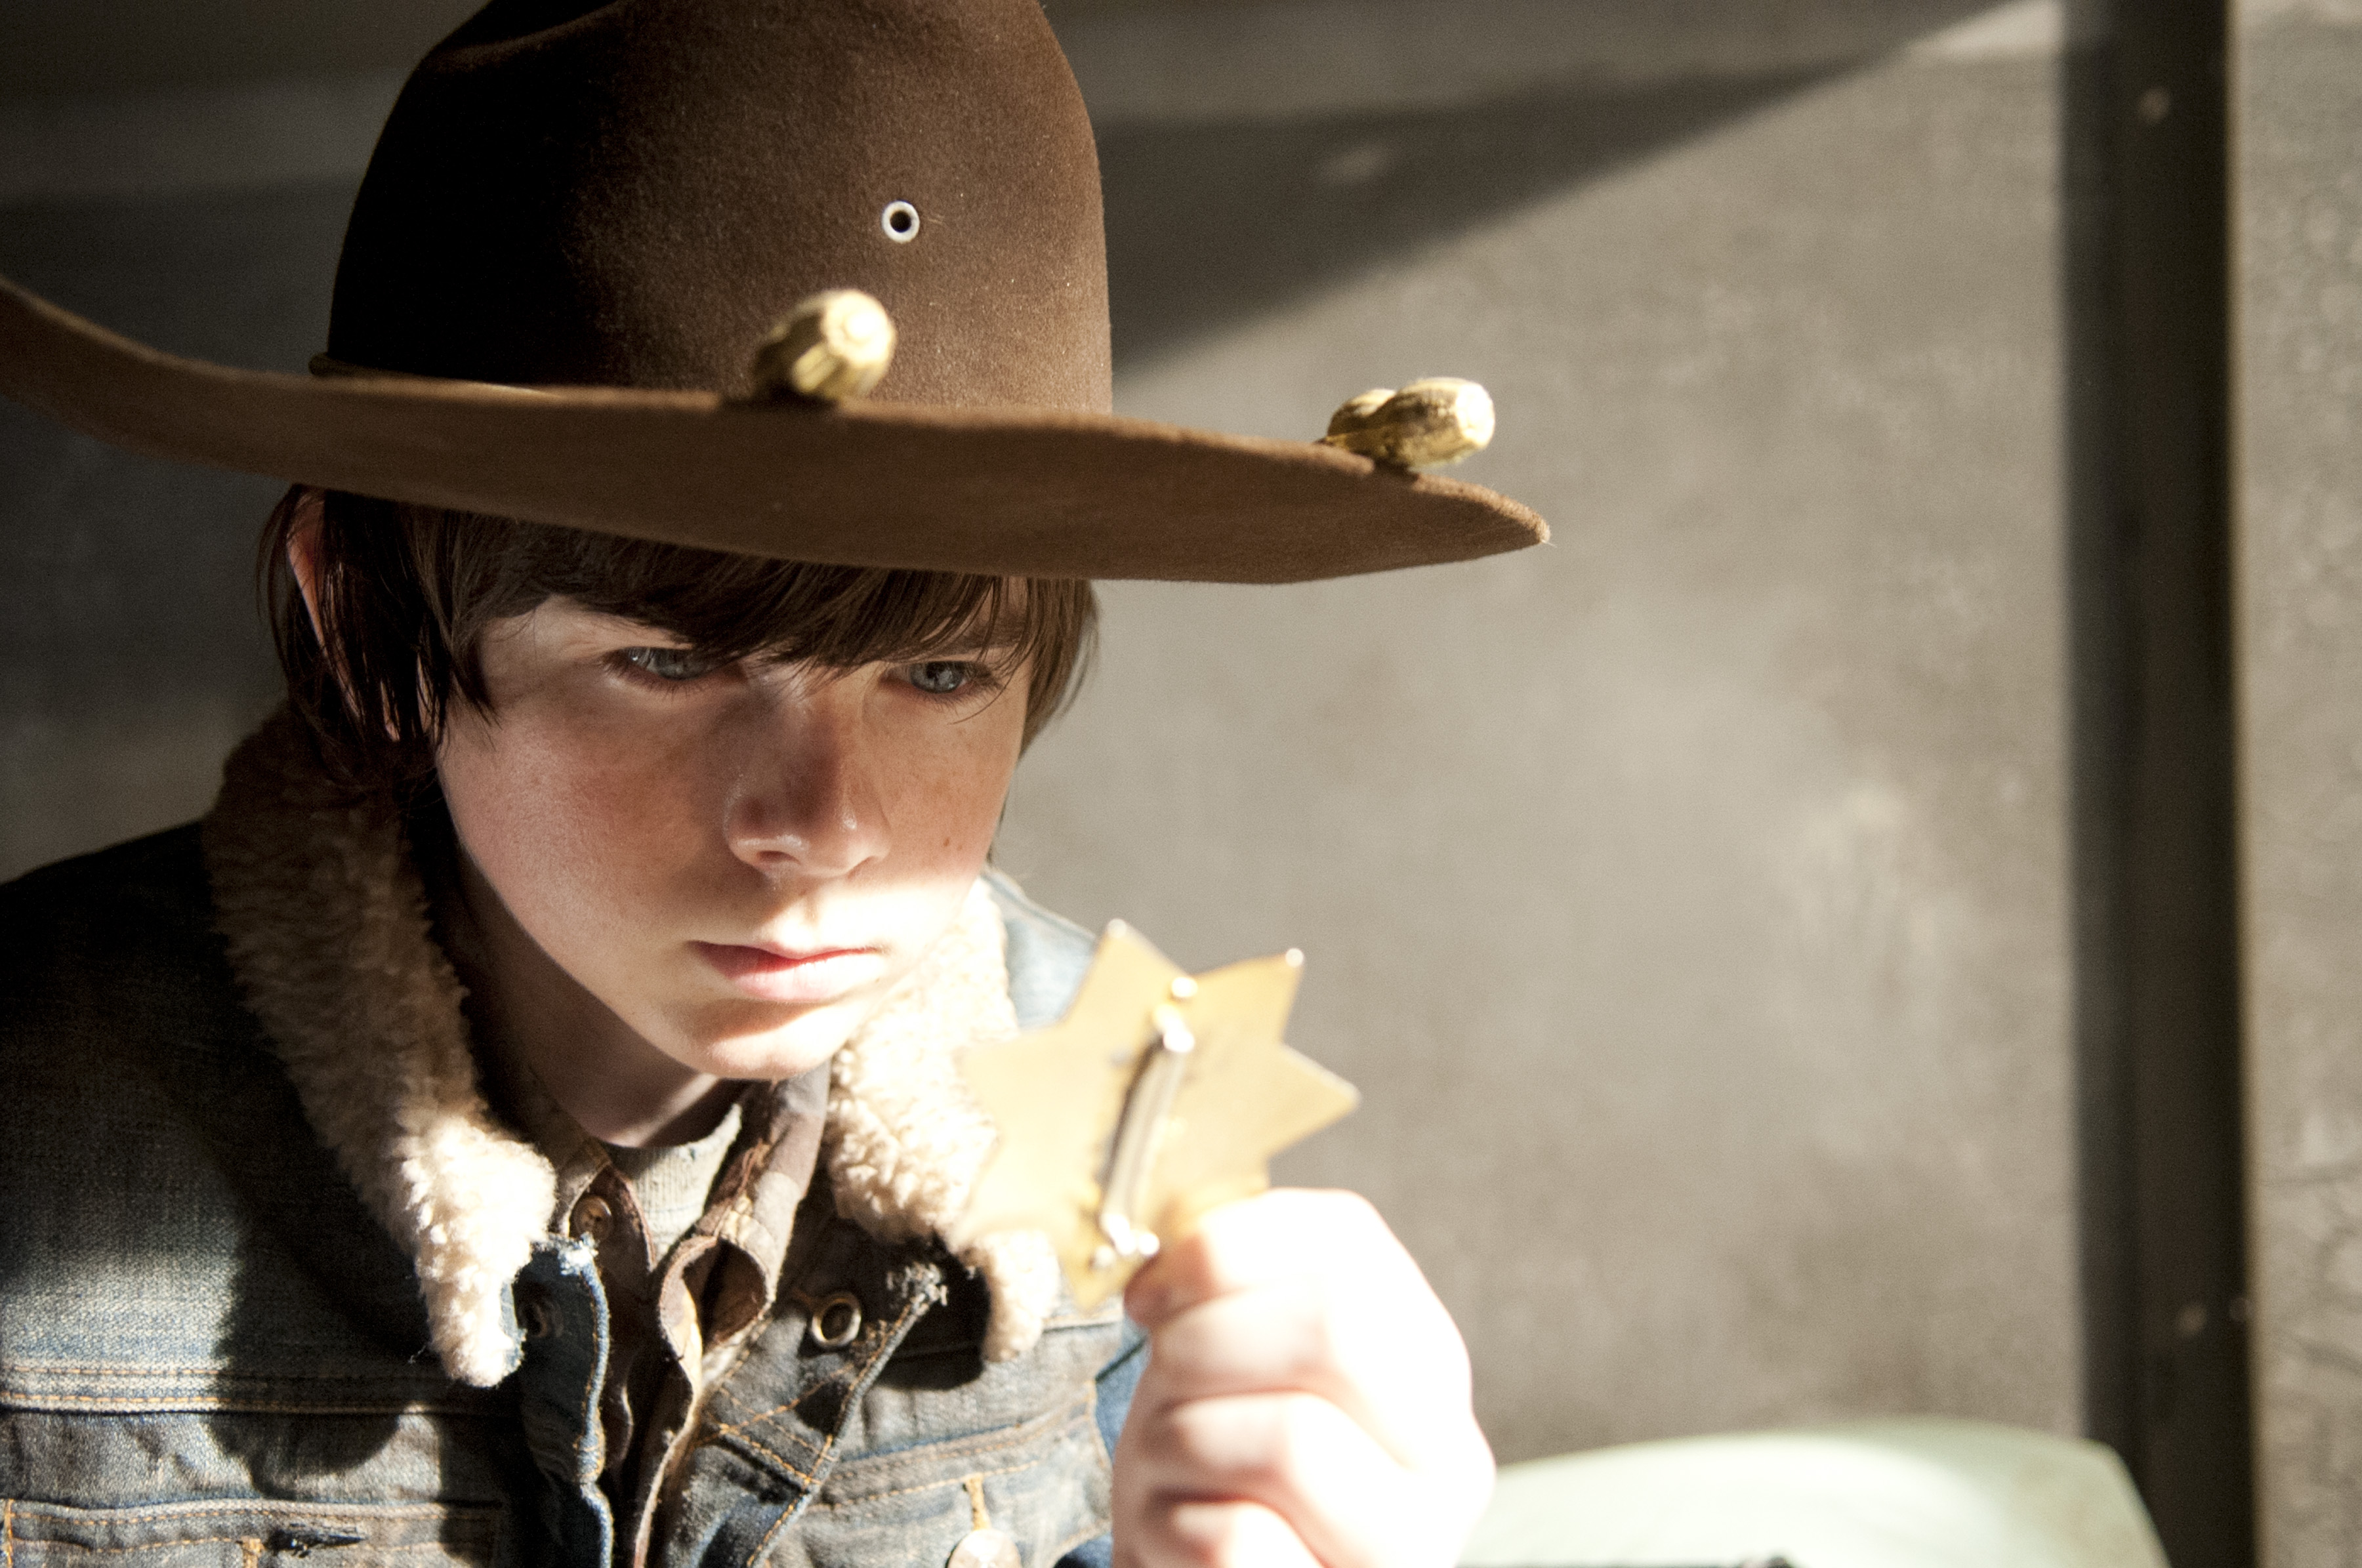 tv show, the walking dead, carl grimes, chandler riggs